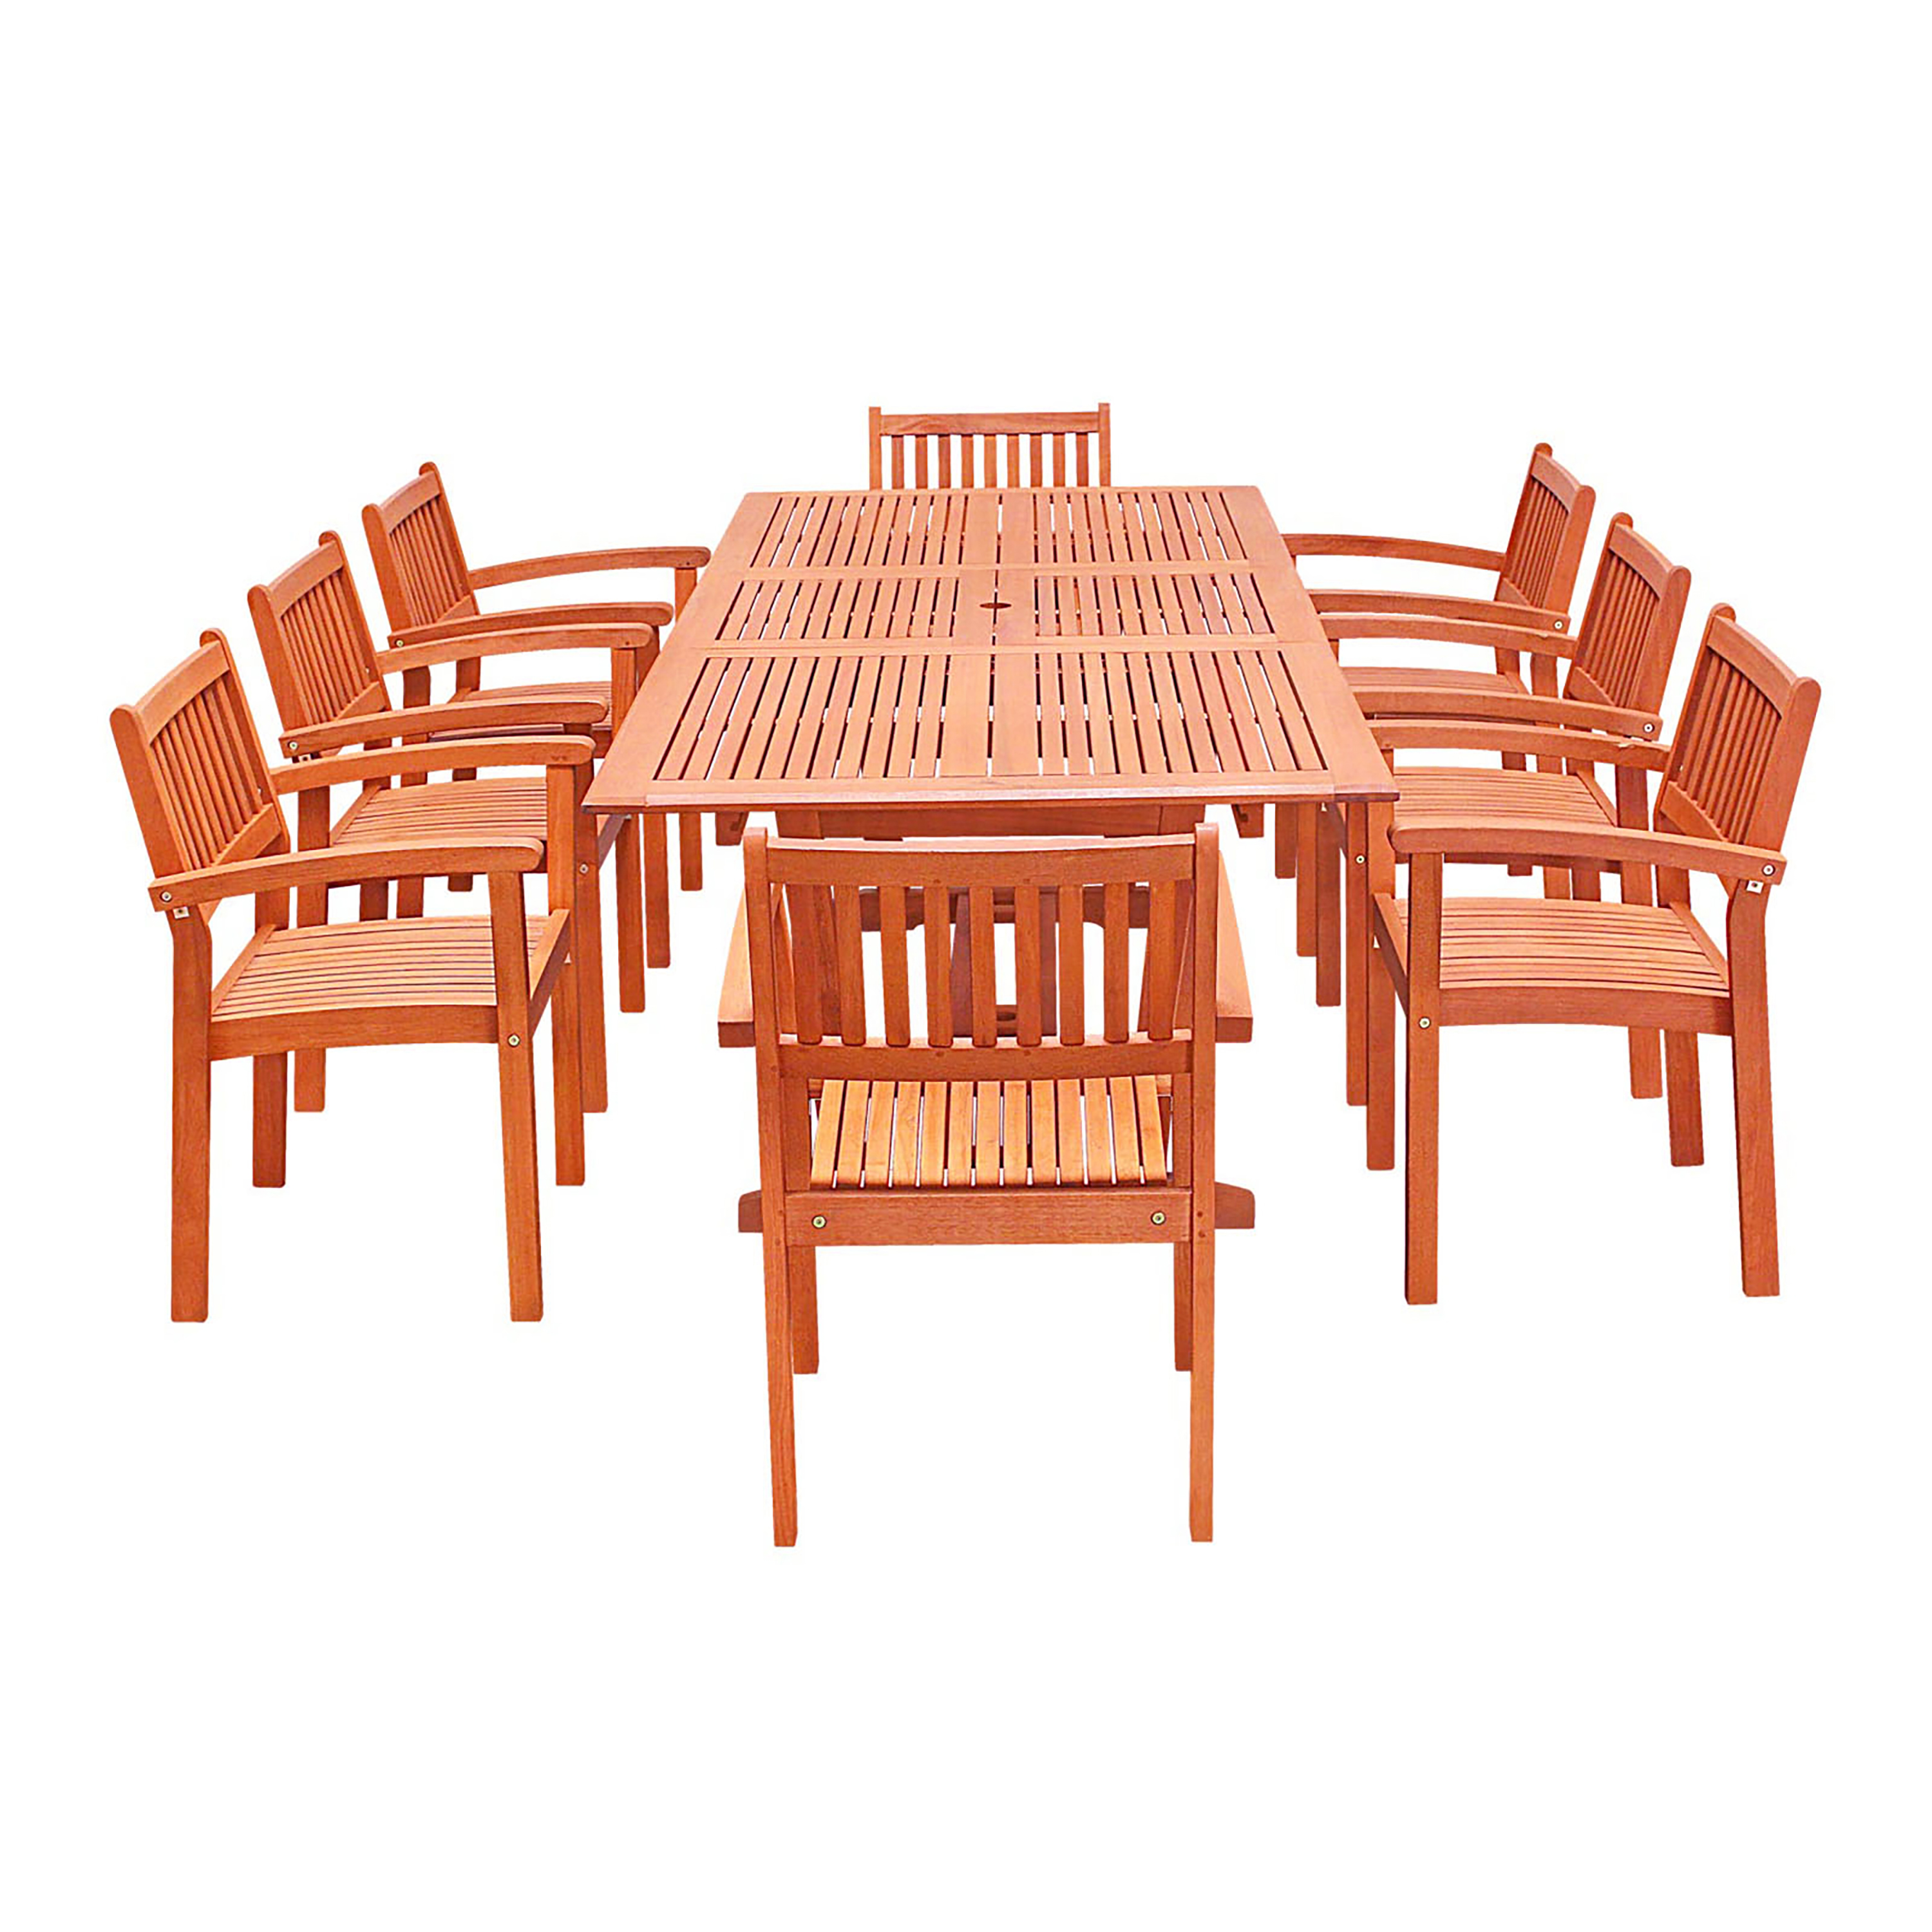 Malibu Outdoor 9-piece Wood Patio Dining Set with Extension Table & Stacking Chairs - image 1 of 4